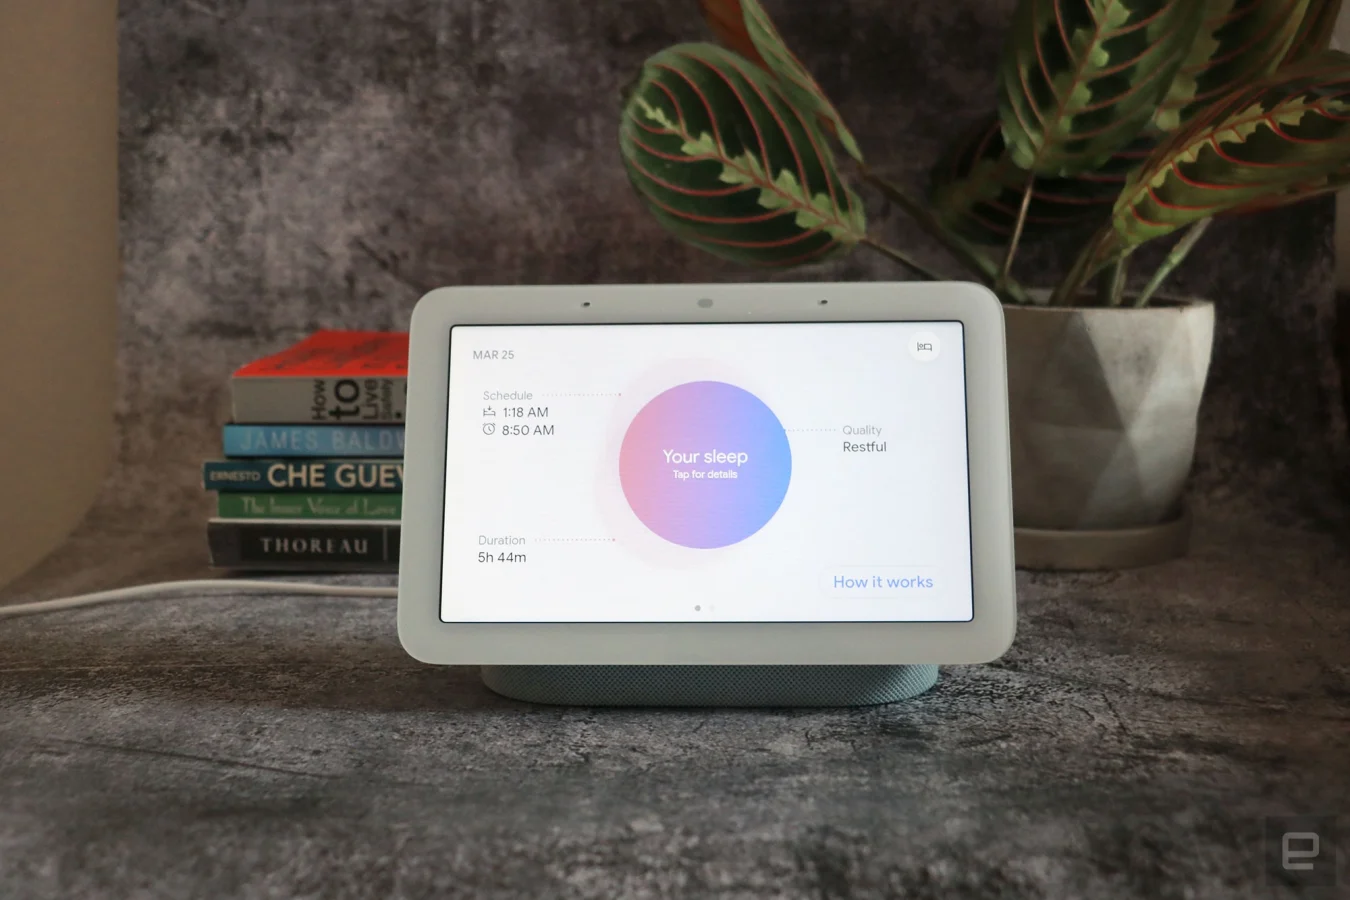 Google Nest Hub 2021 (2nd gen) photo. Picture of Google's newest smart display on a table with books and a plant in the background.